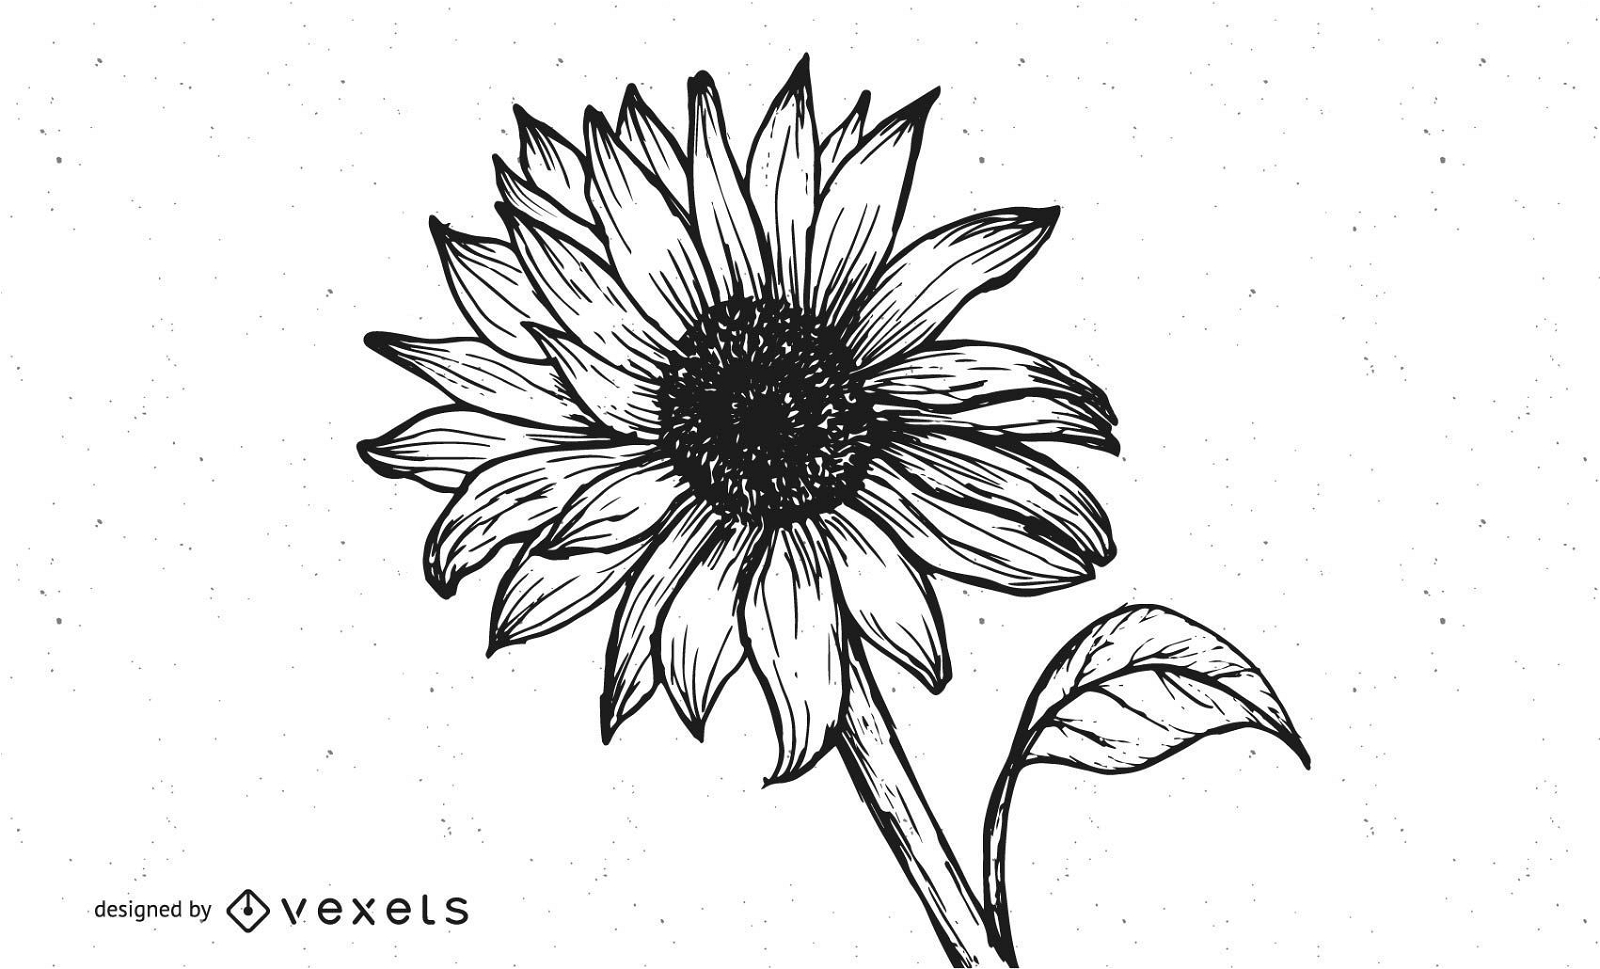 Download Grungy Hand Drawn Sunflower - Vector download